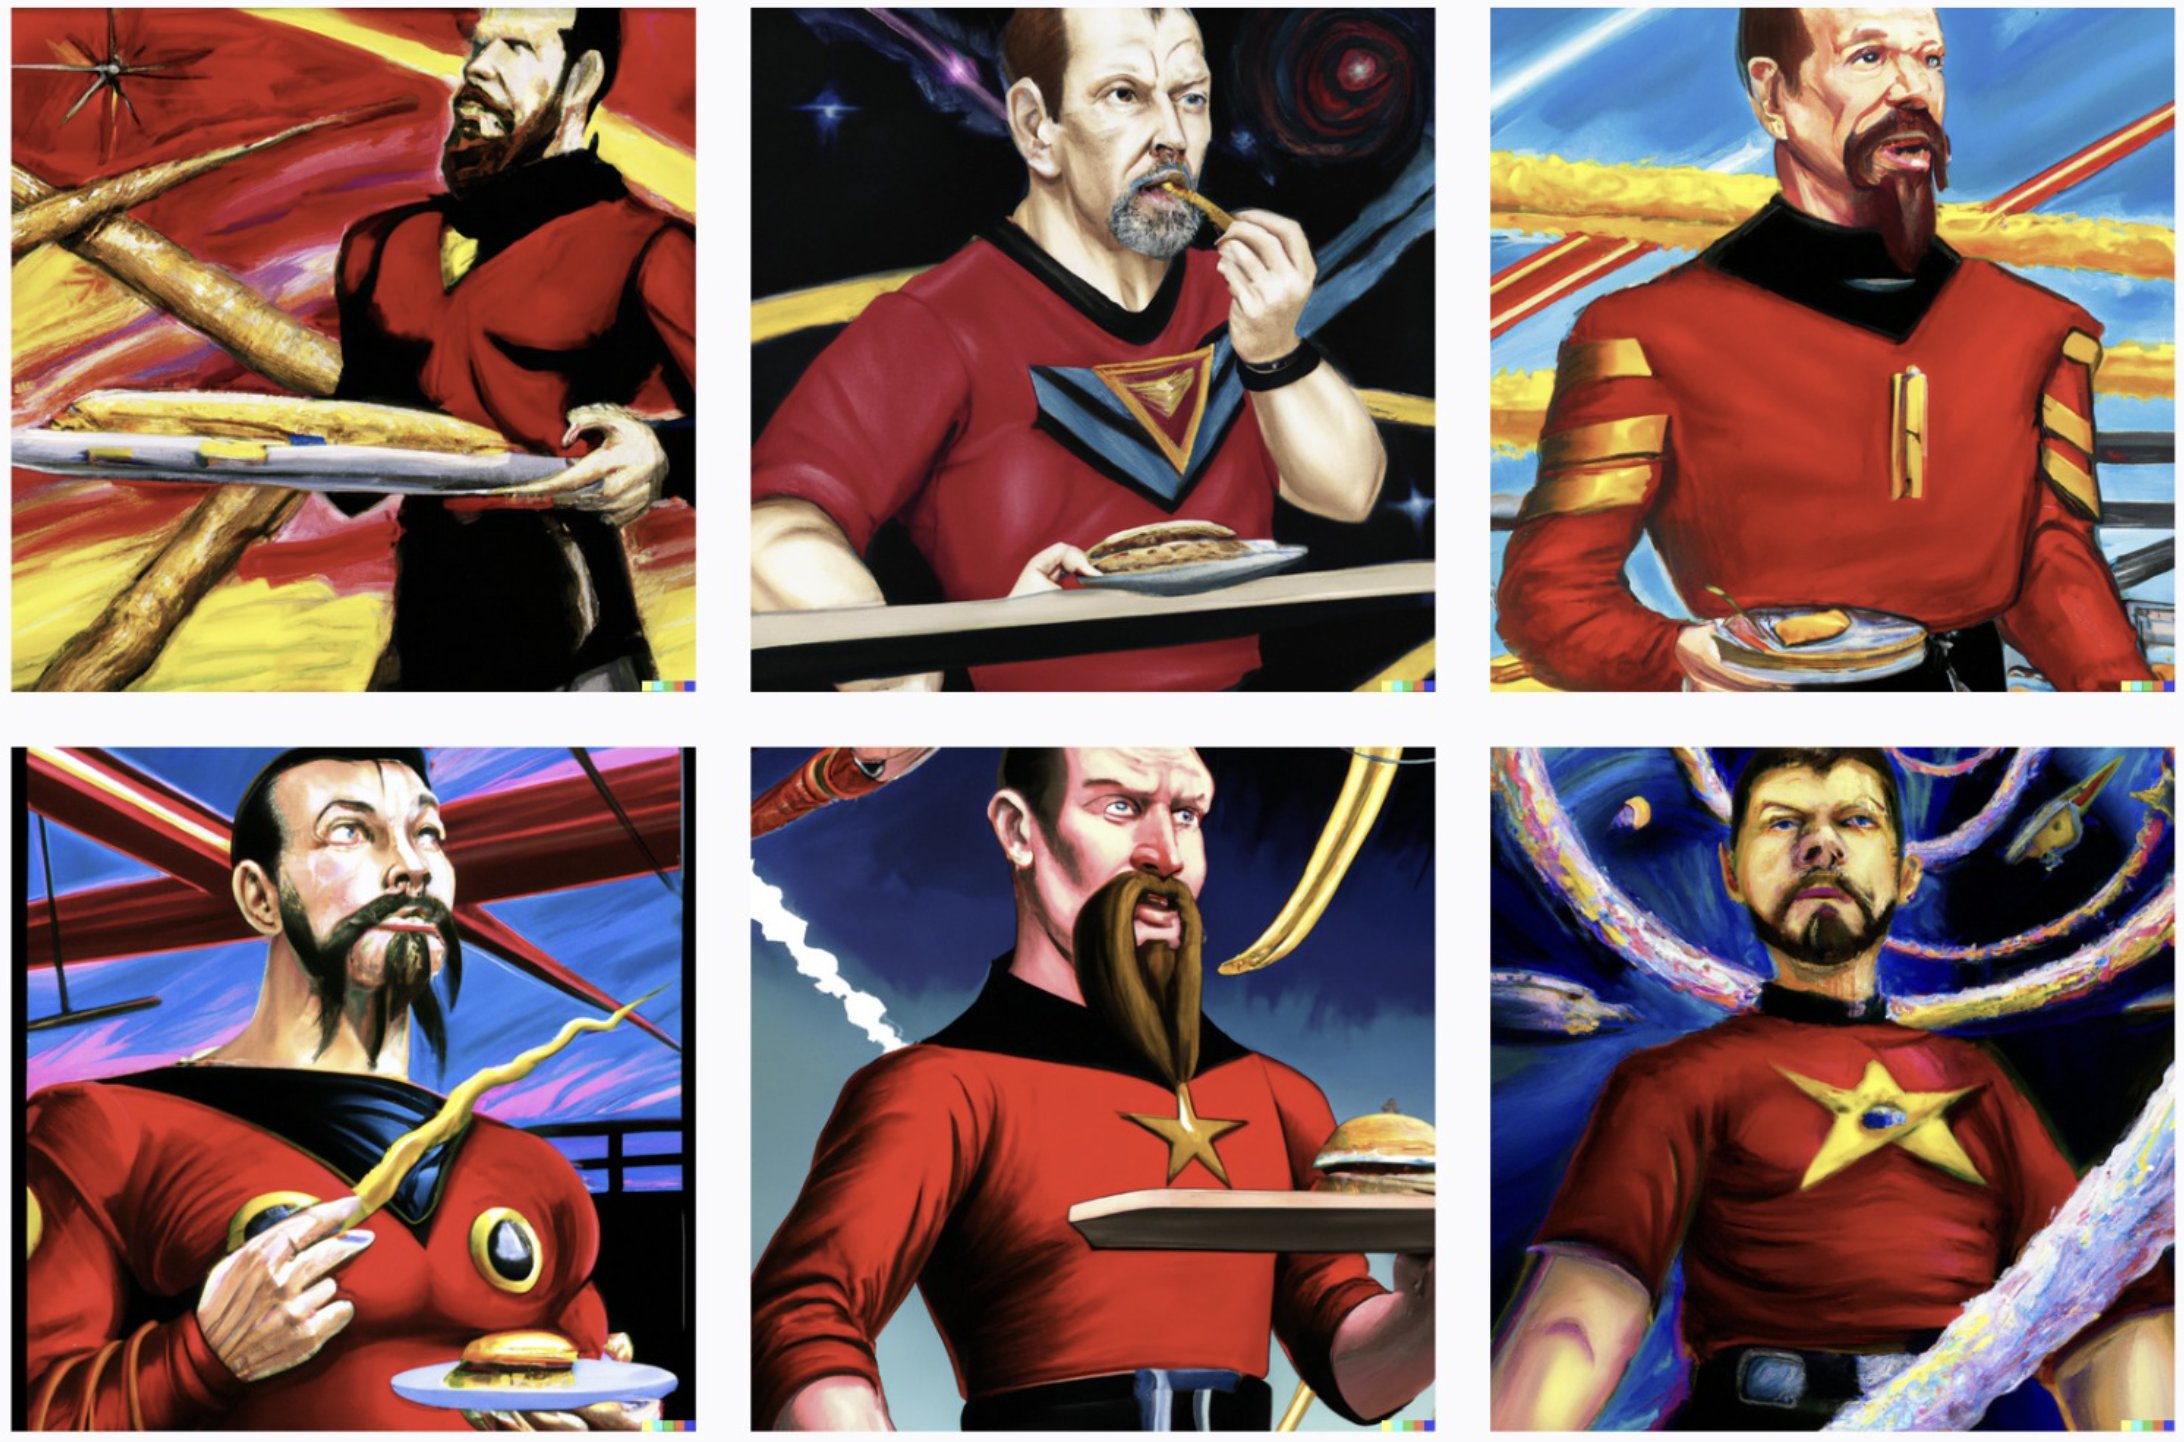 A painting in the style of Todd McFarlane with a dramatic angle of William T. Riker with the goatee, wearing his red Star Trek uniform, eating a hot dog in a hot dog eating contest while standing proudly on the bridge of the Starship Enterprise.